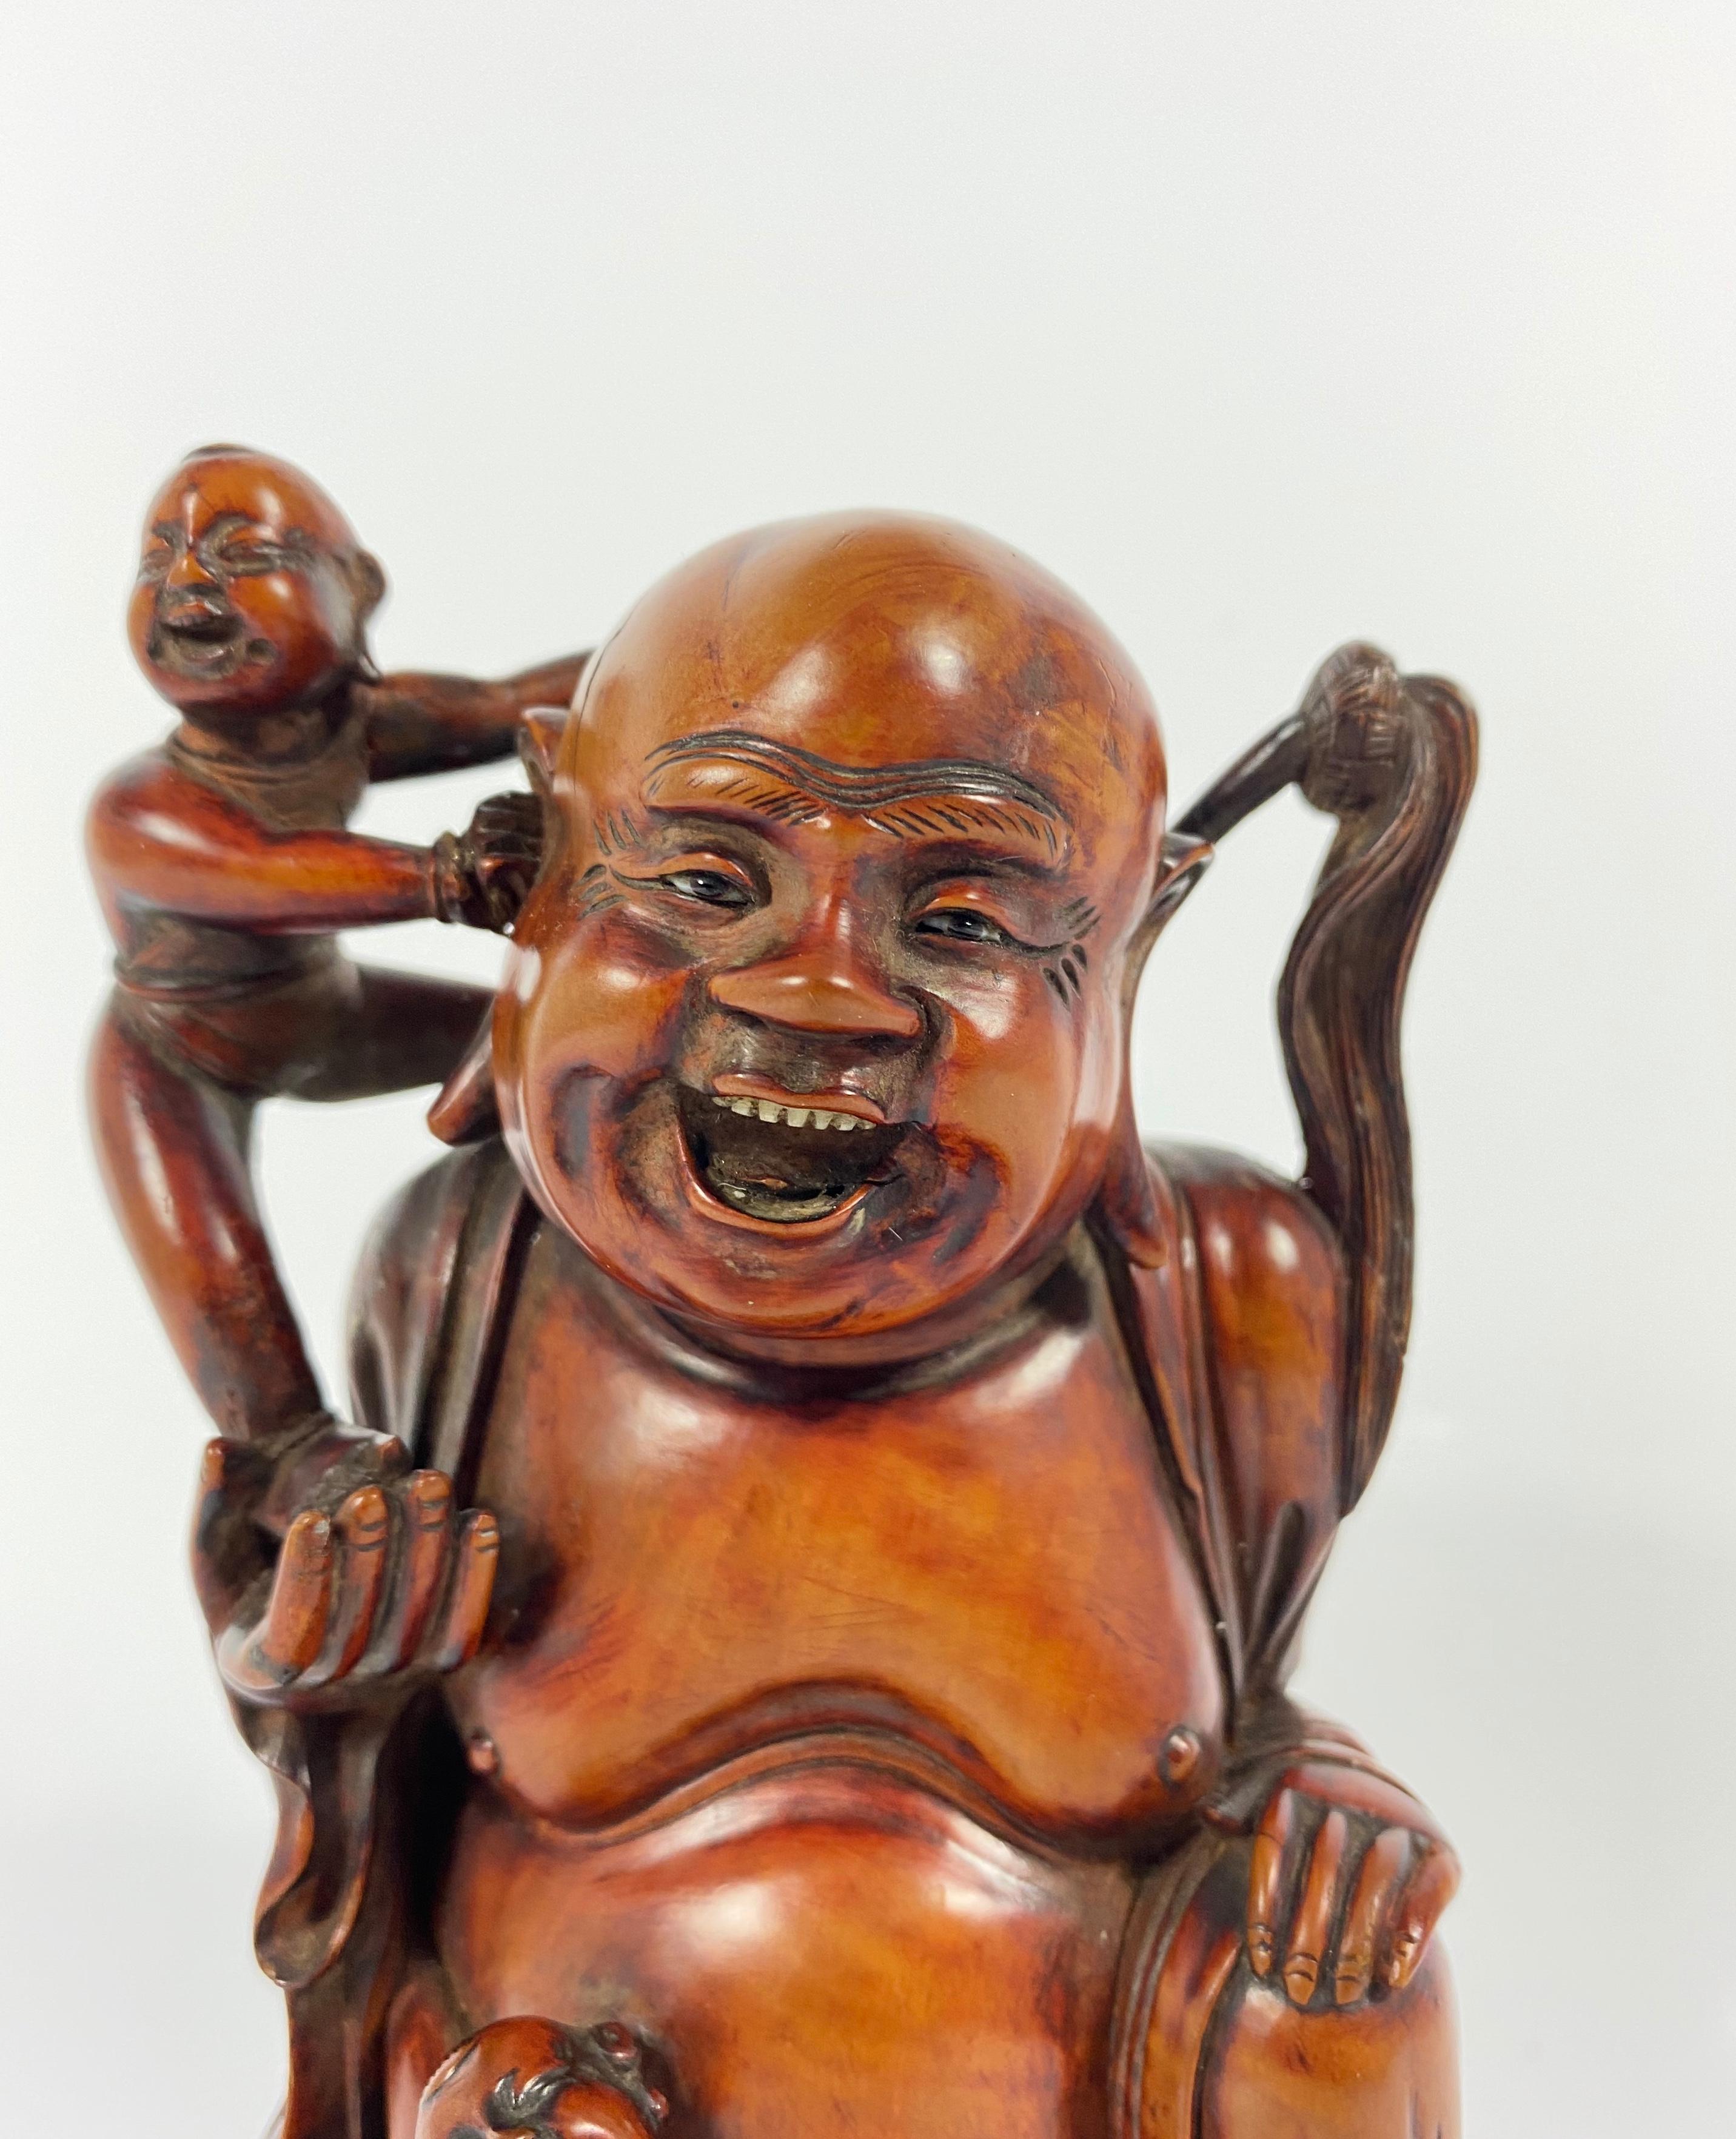 An exceptionally fine Chinese hardwood figure of Buddha and the He He Erxian twins, 19th century, Qing Dynasty. Beautifully, and amusingly carved as Buddha, seated cross legged, and with an amused expression, whilst the twins attend to him. His face